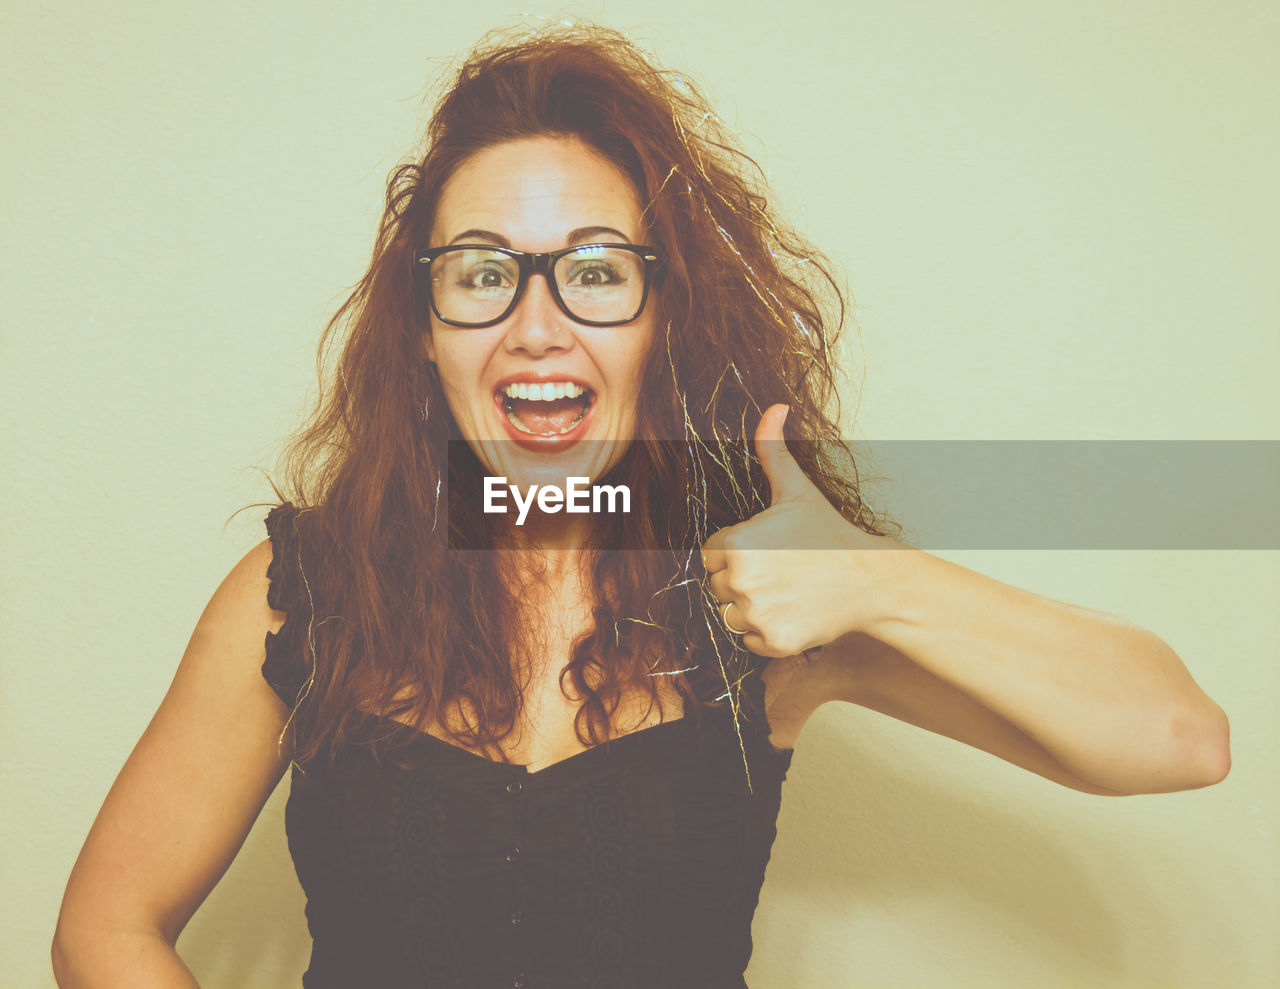 Portrait of smiling young woman wearing eyeglasses